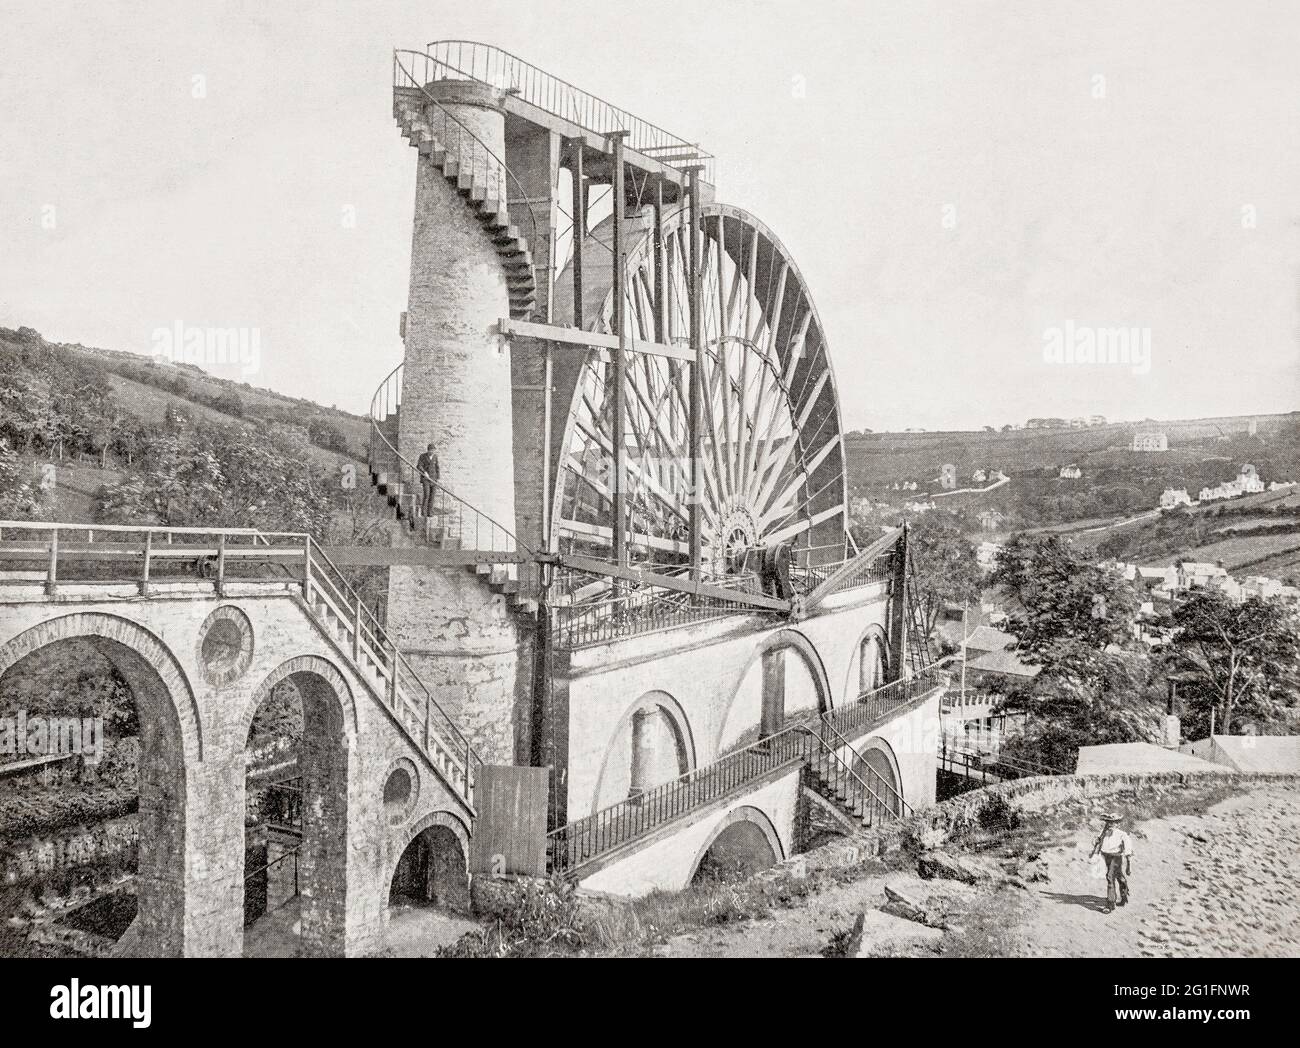 A late 19th century view of Laxey Wheel (also known as Lady Isabella) is built into the hillside above the village of Laxey in the Isle of Man. The largest working waterwheel in the world with a 72-foot-6-inch (22.1 m) diameter, revolving at approximately three revolutions per minute. It was designed by Robert Casement in 1854 to pump water from the Great Laxey Mines industrial complex, employing over 600 miners at its peak, producing lead, copper, silver and zinc, until it closed in 1929. Stock Photo